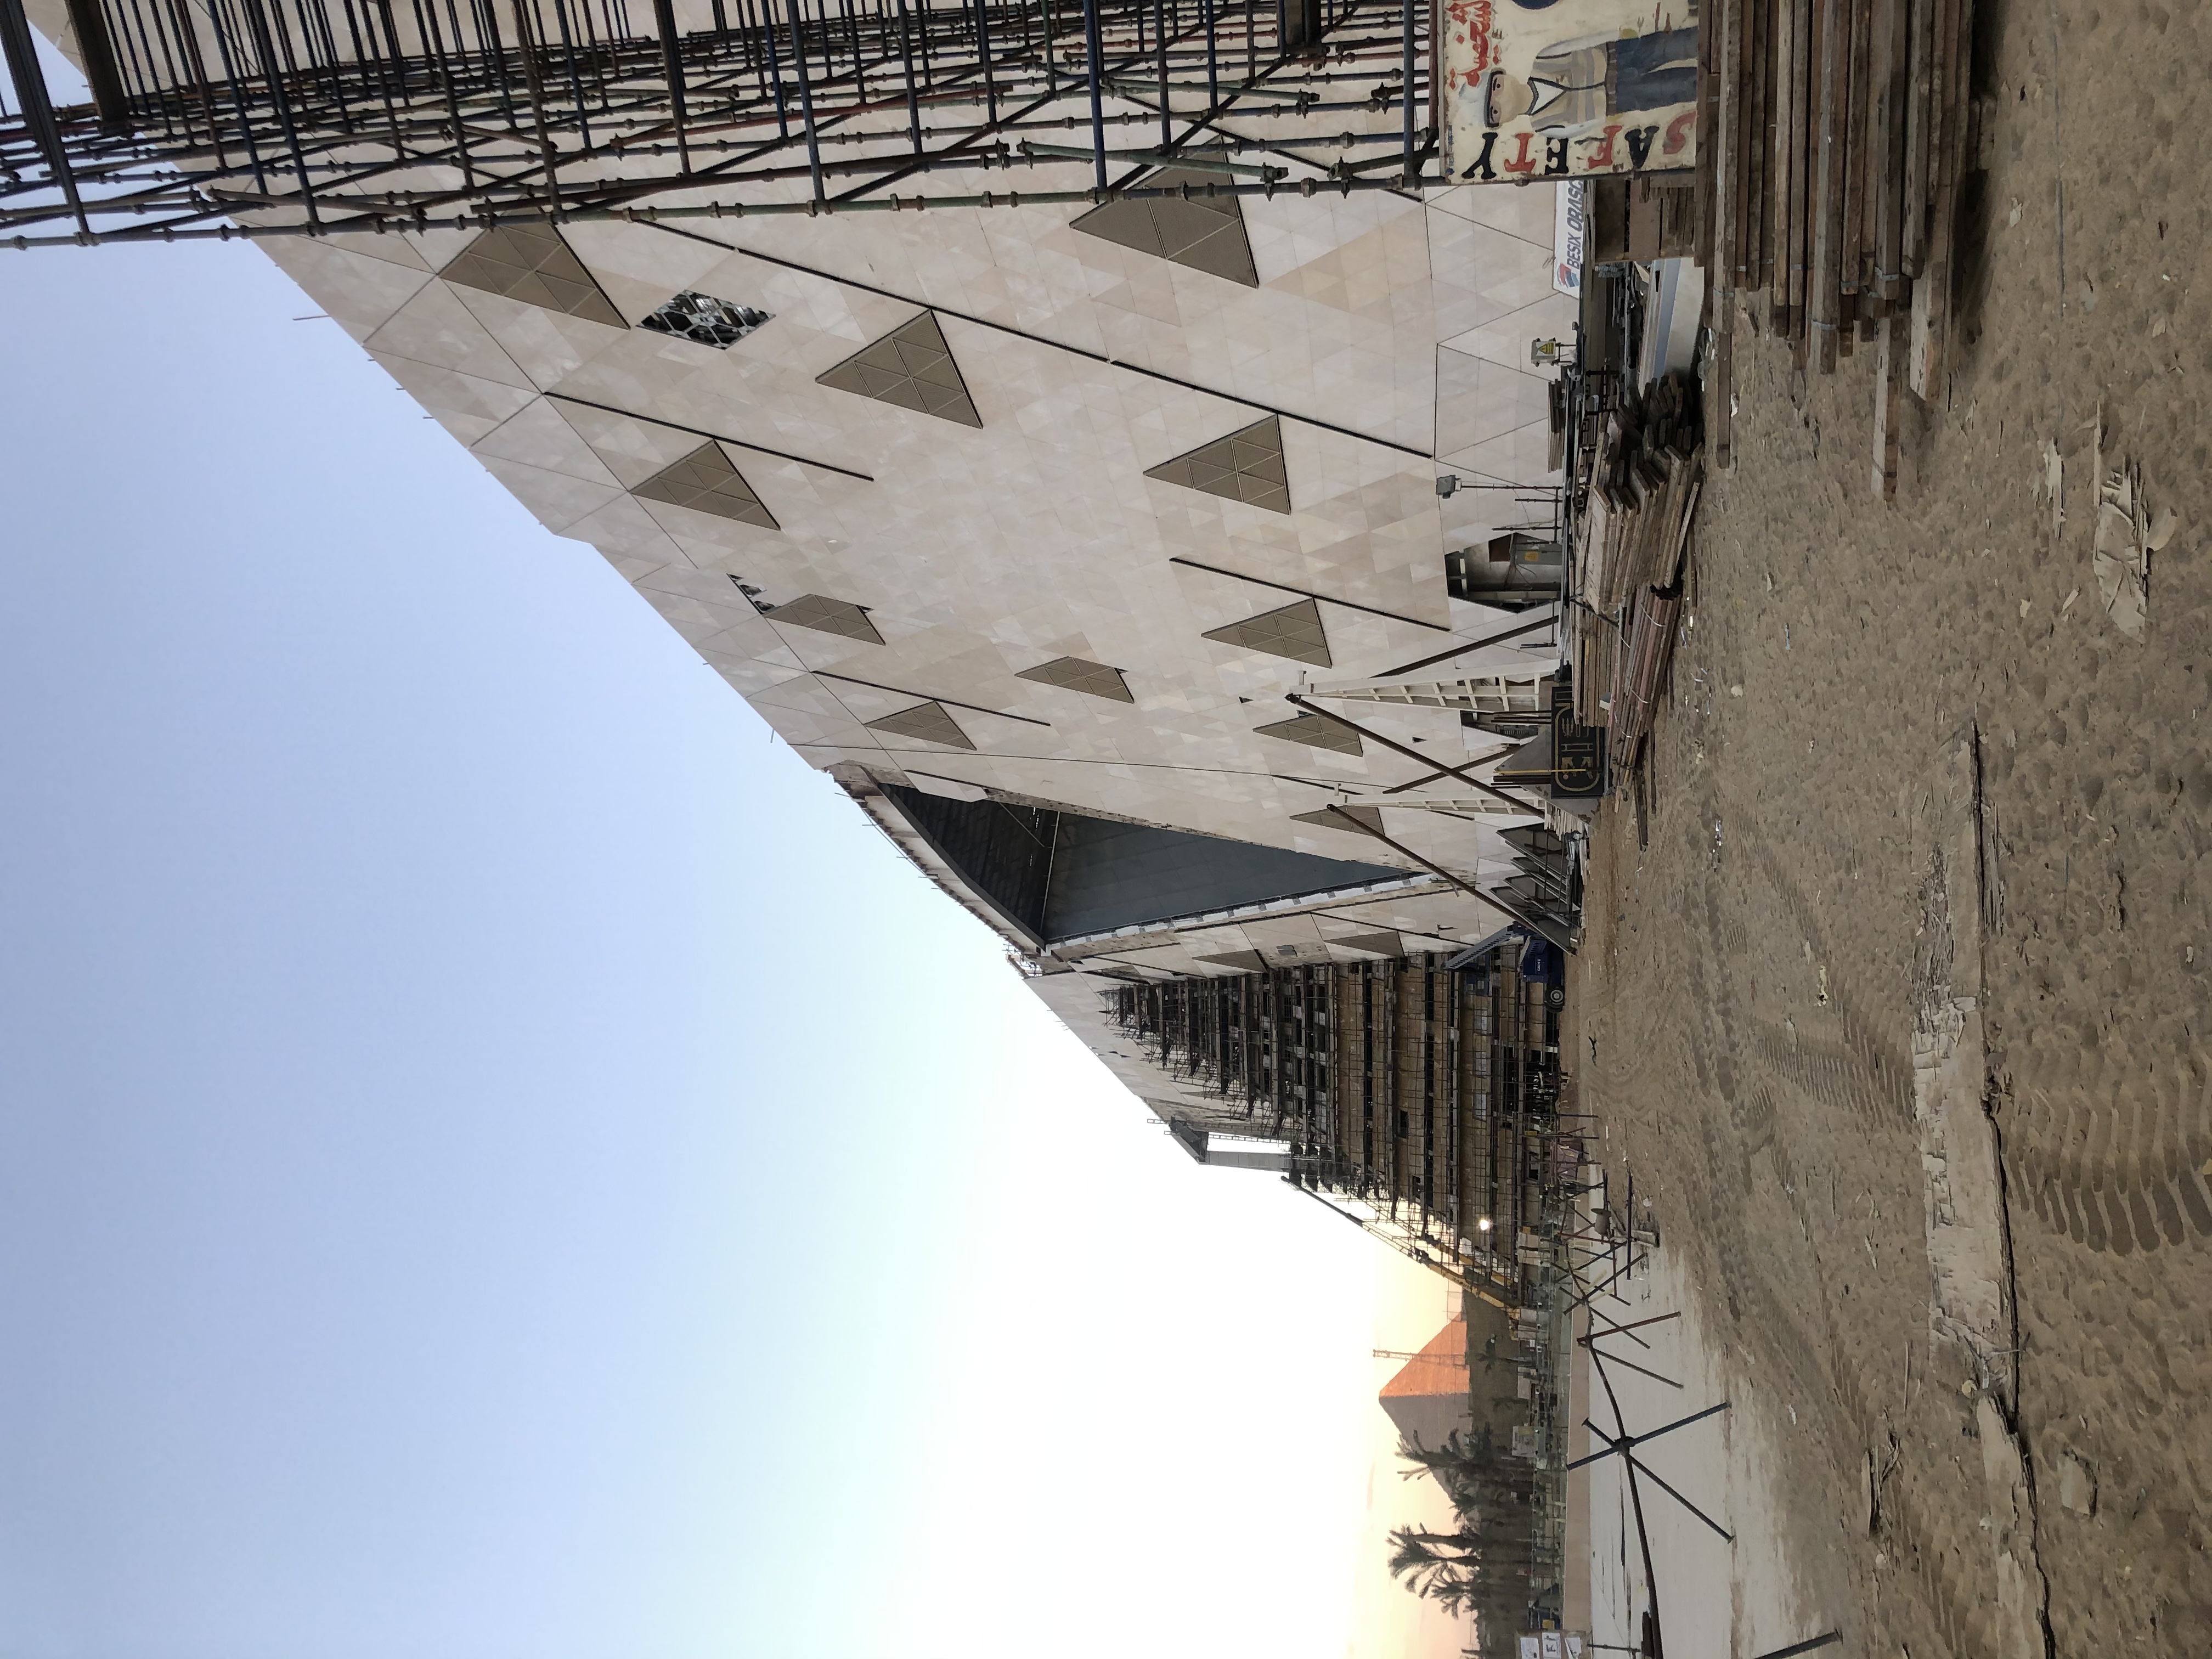  The Grand Egyptian Museum is currently being built in Cairo